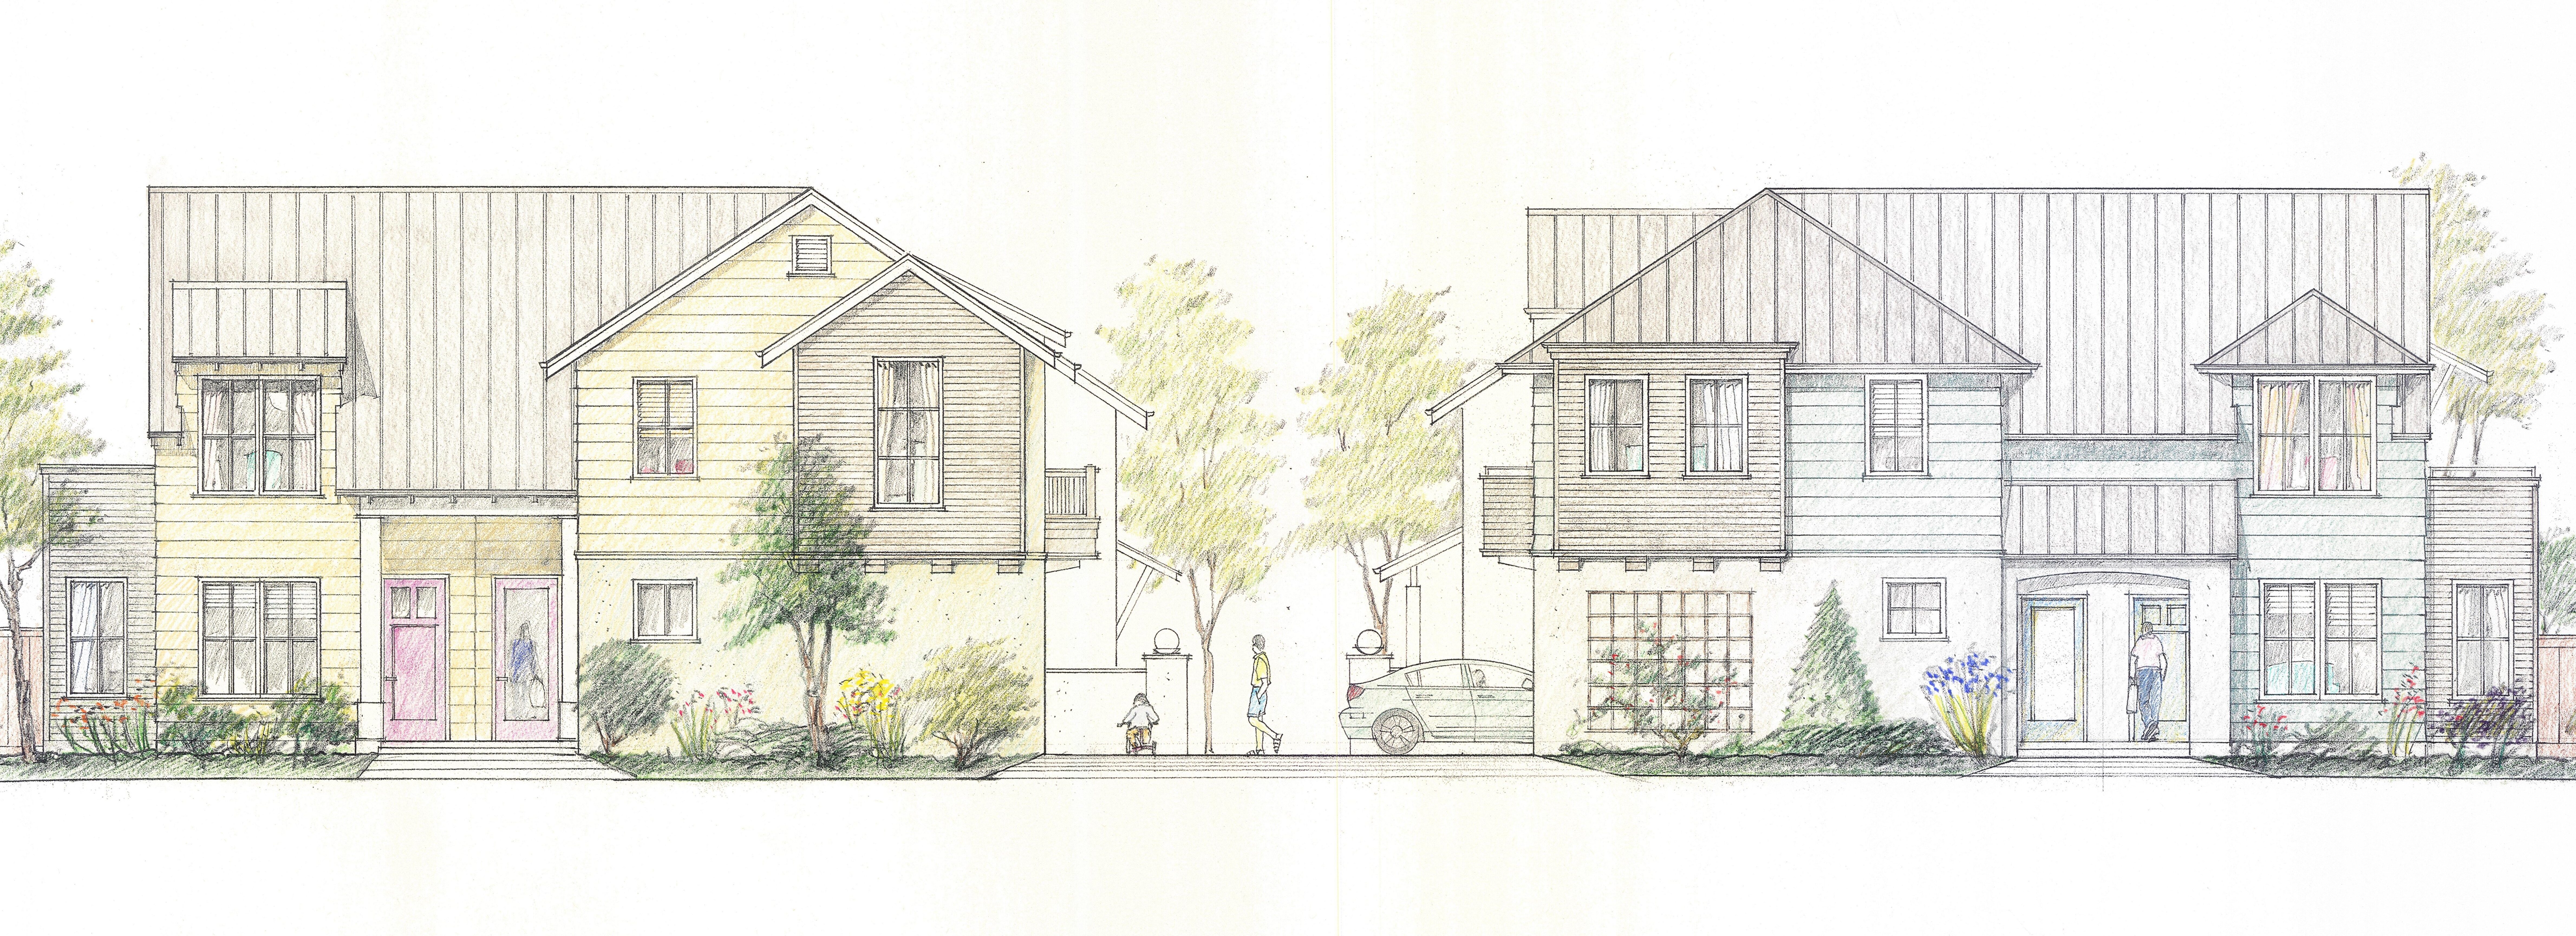 Drawings of a Circle Church housing plan shows two single-family homes with shrubs and trees.